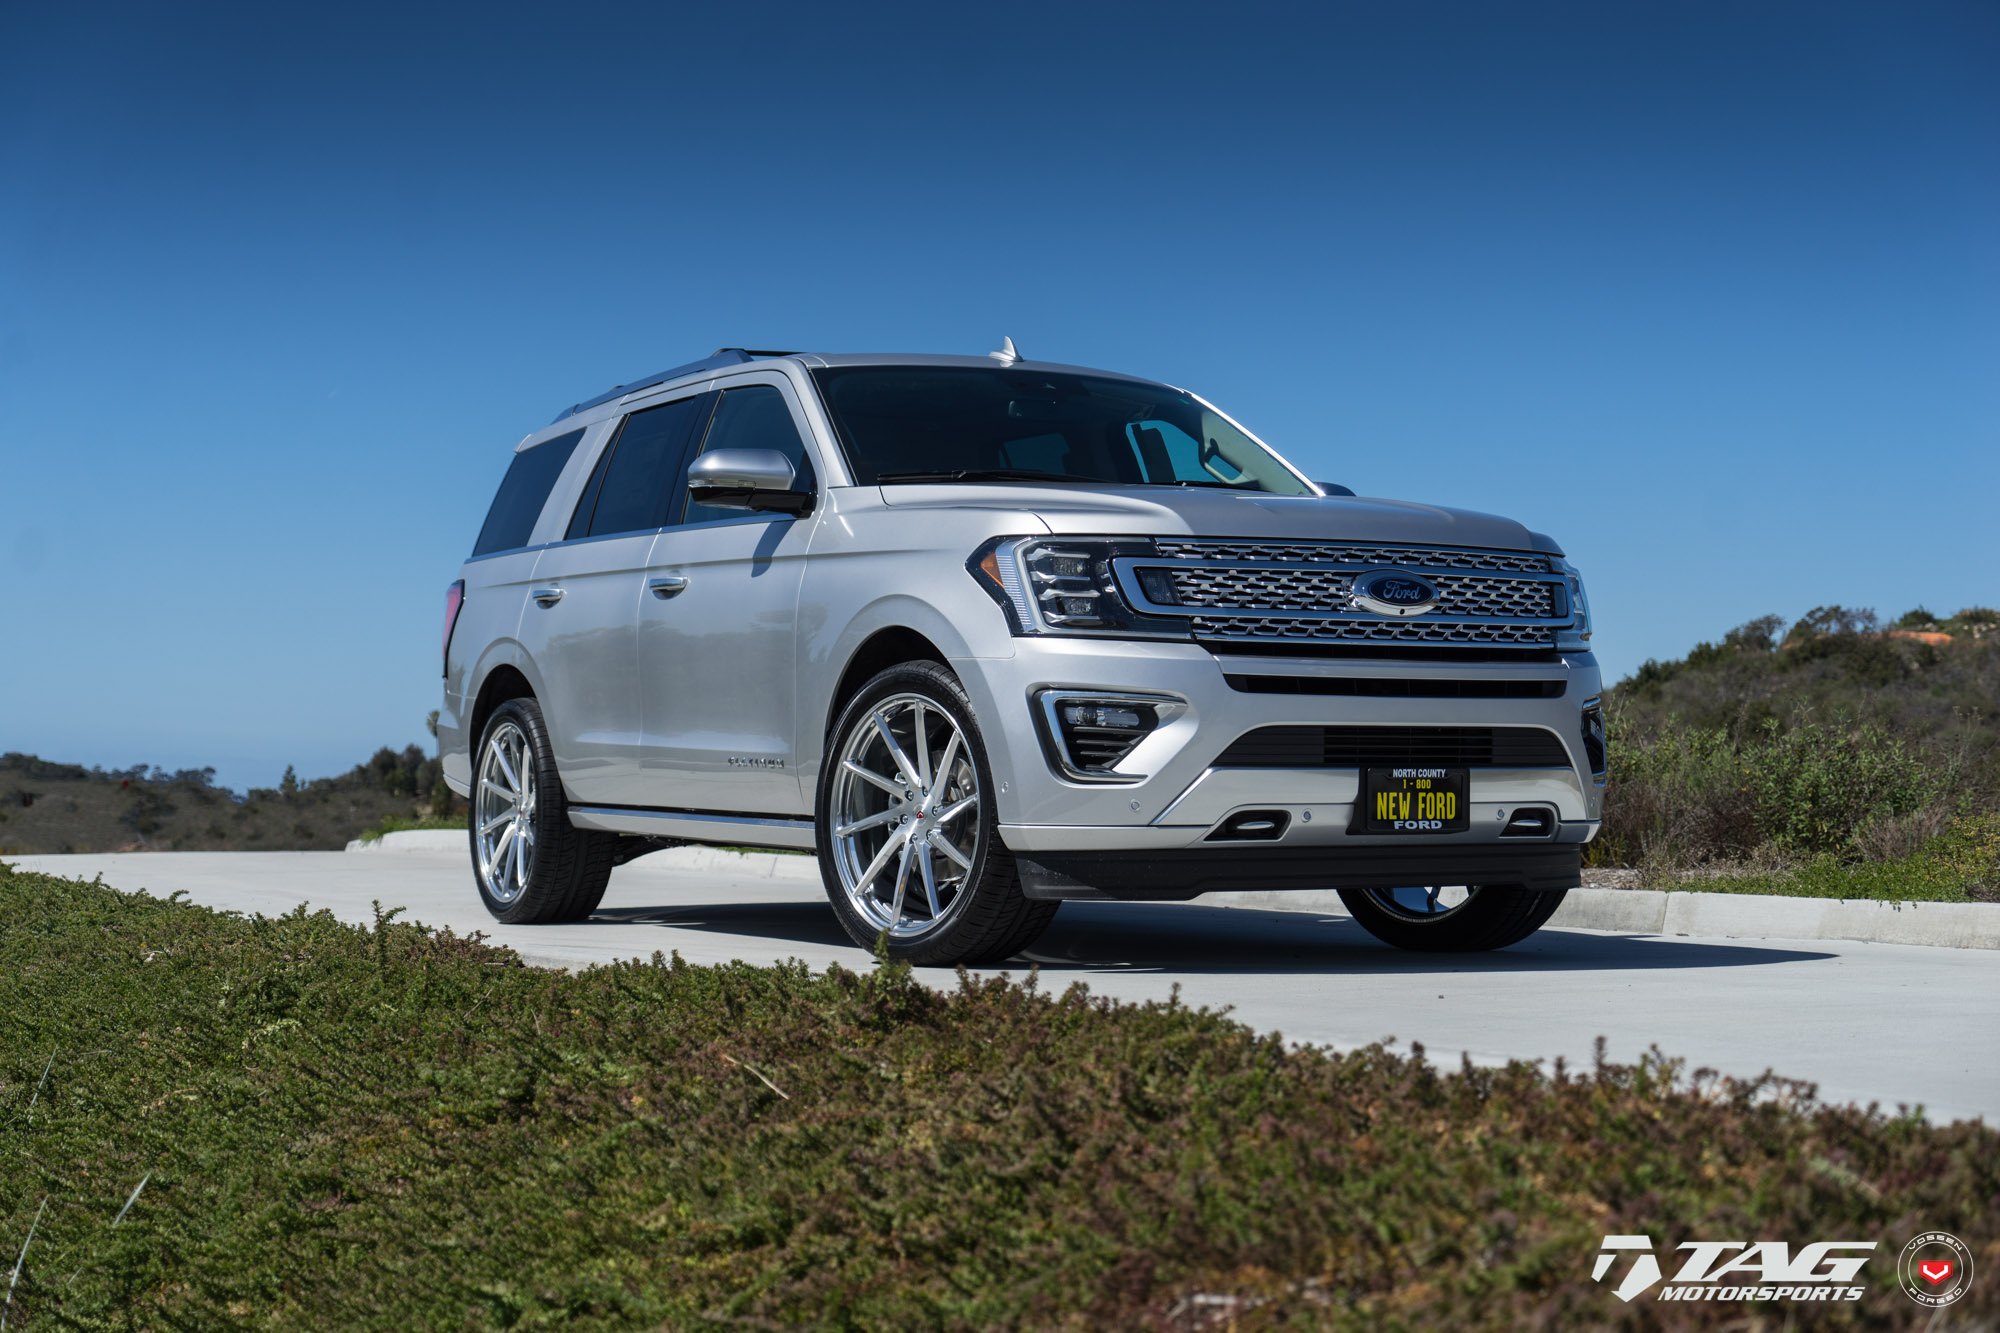 Custom Mesh Grille on Silver Ford Expedition - Photo by Vossen